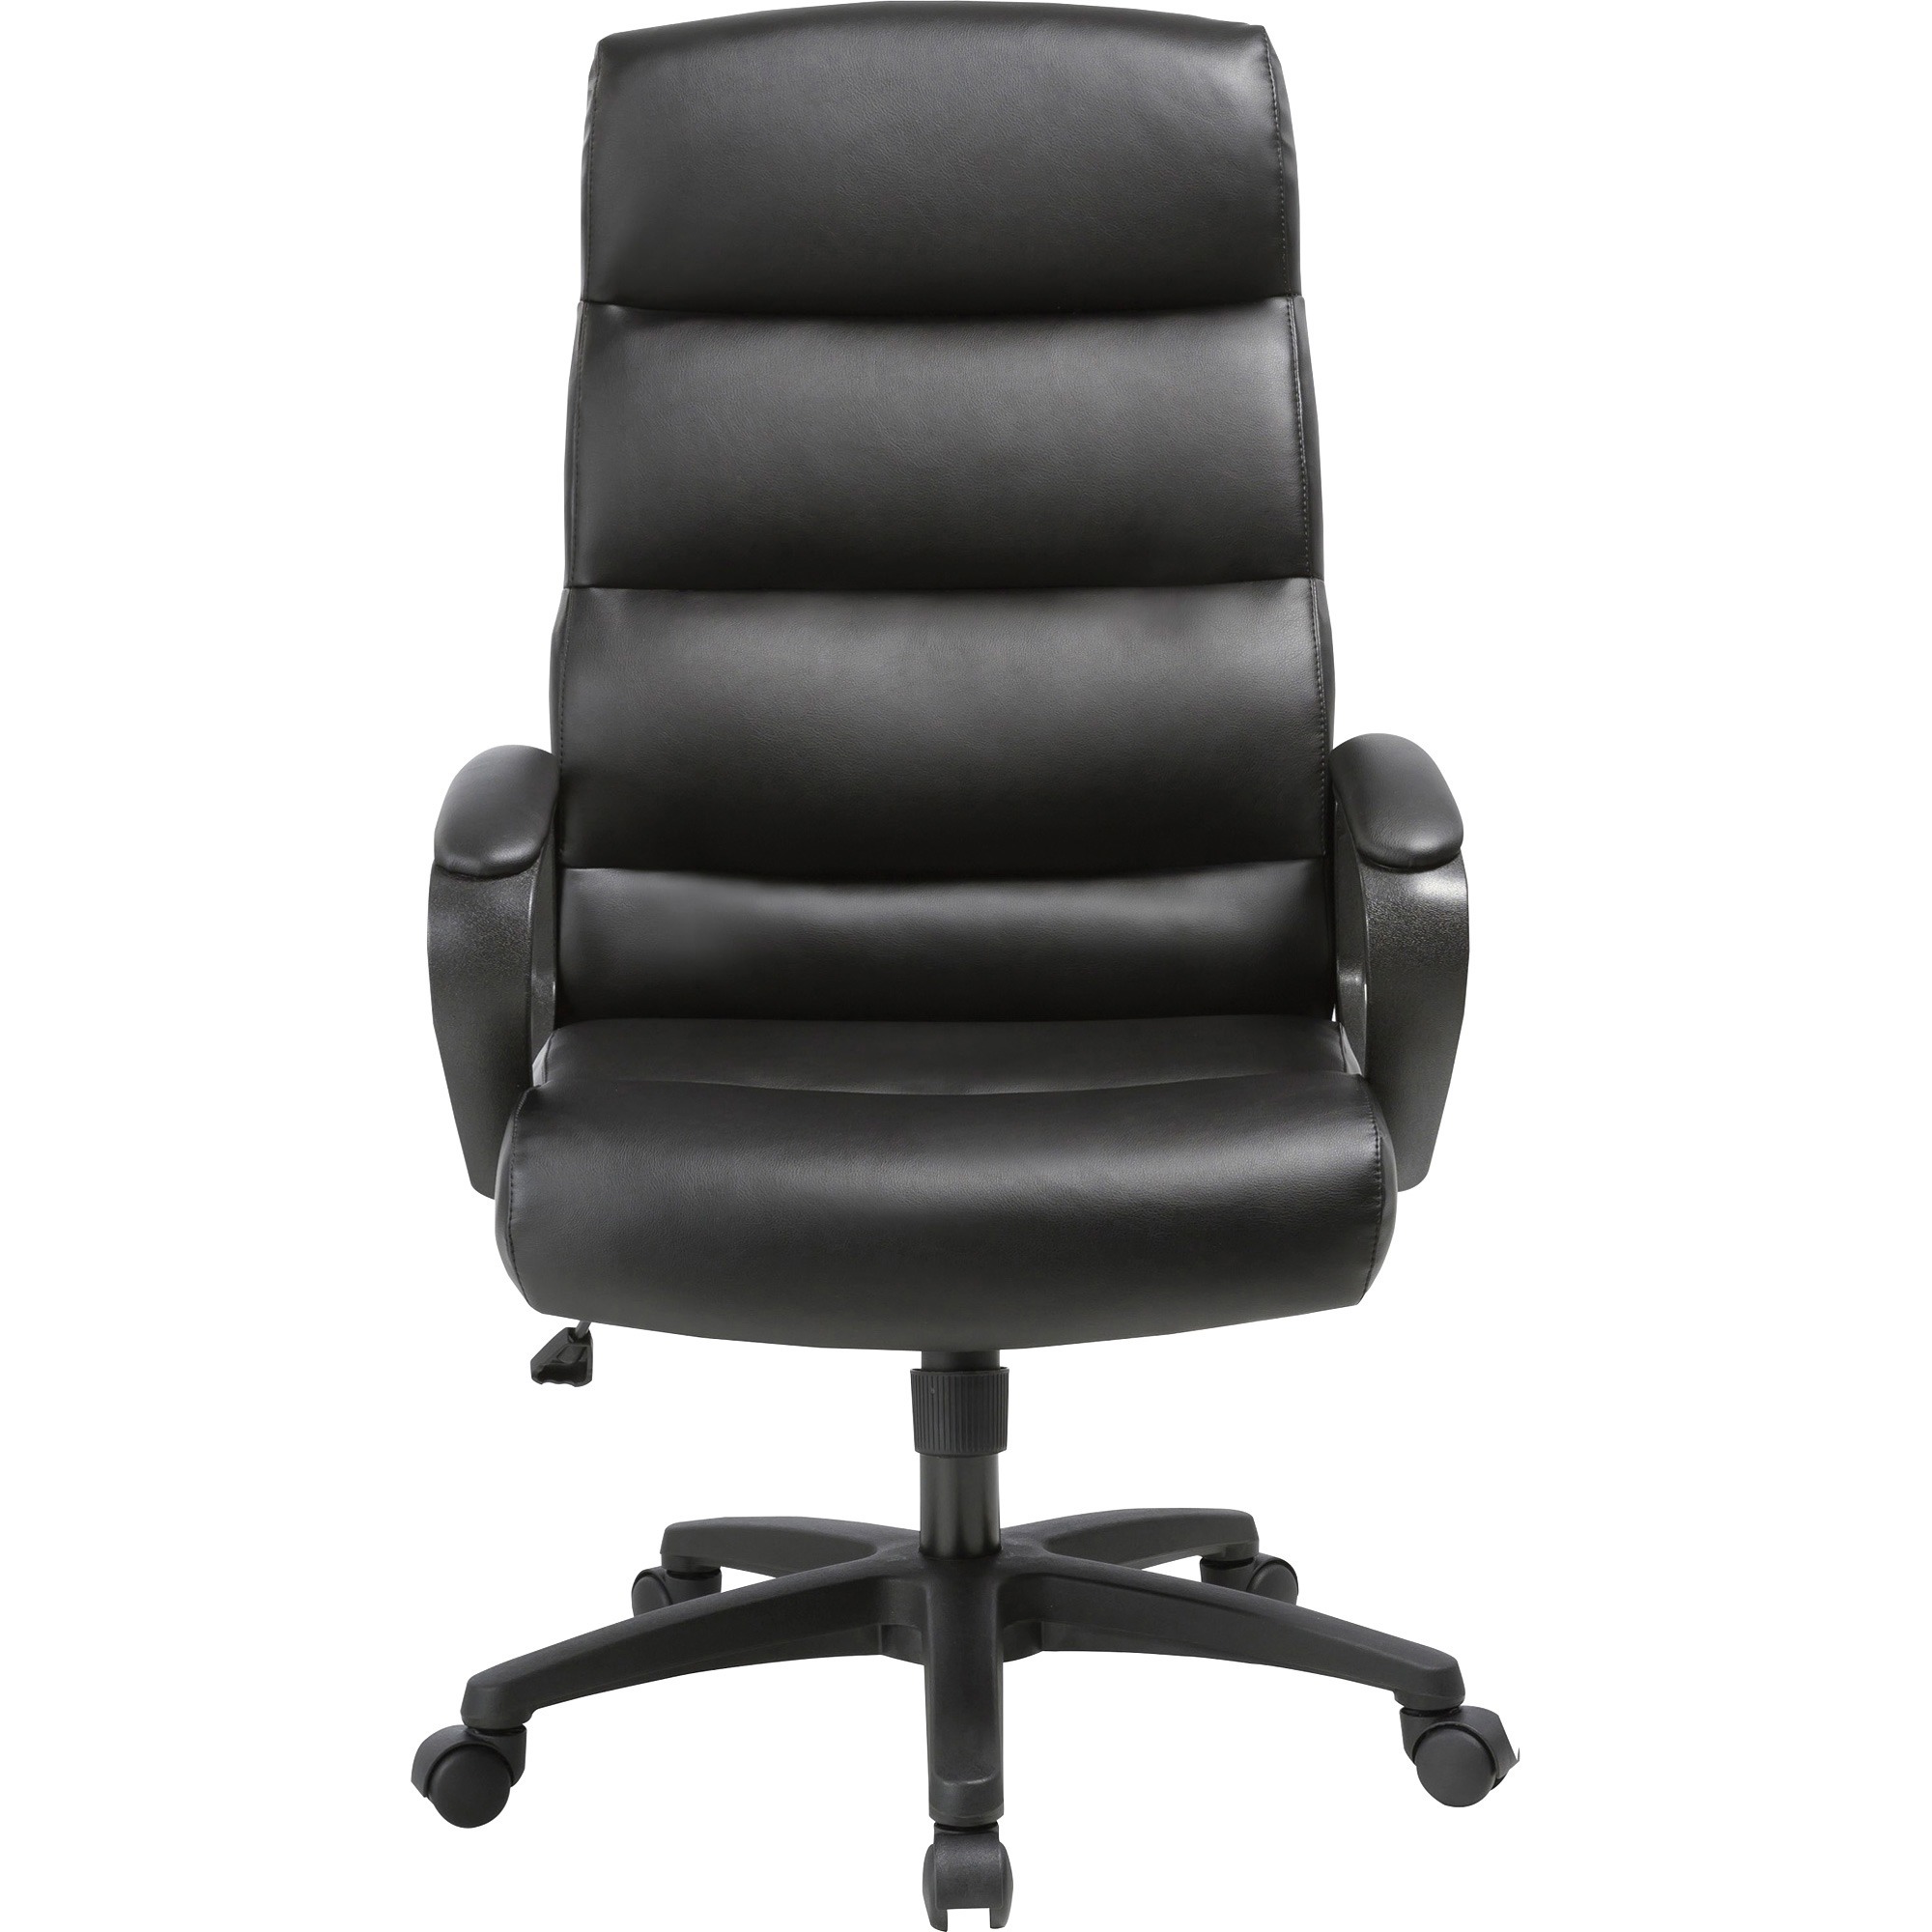 Llr 41843 Lorell Soho High Back Leather Executive Chair Lorell Furniture